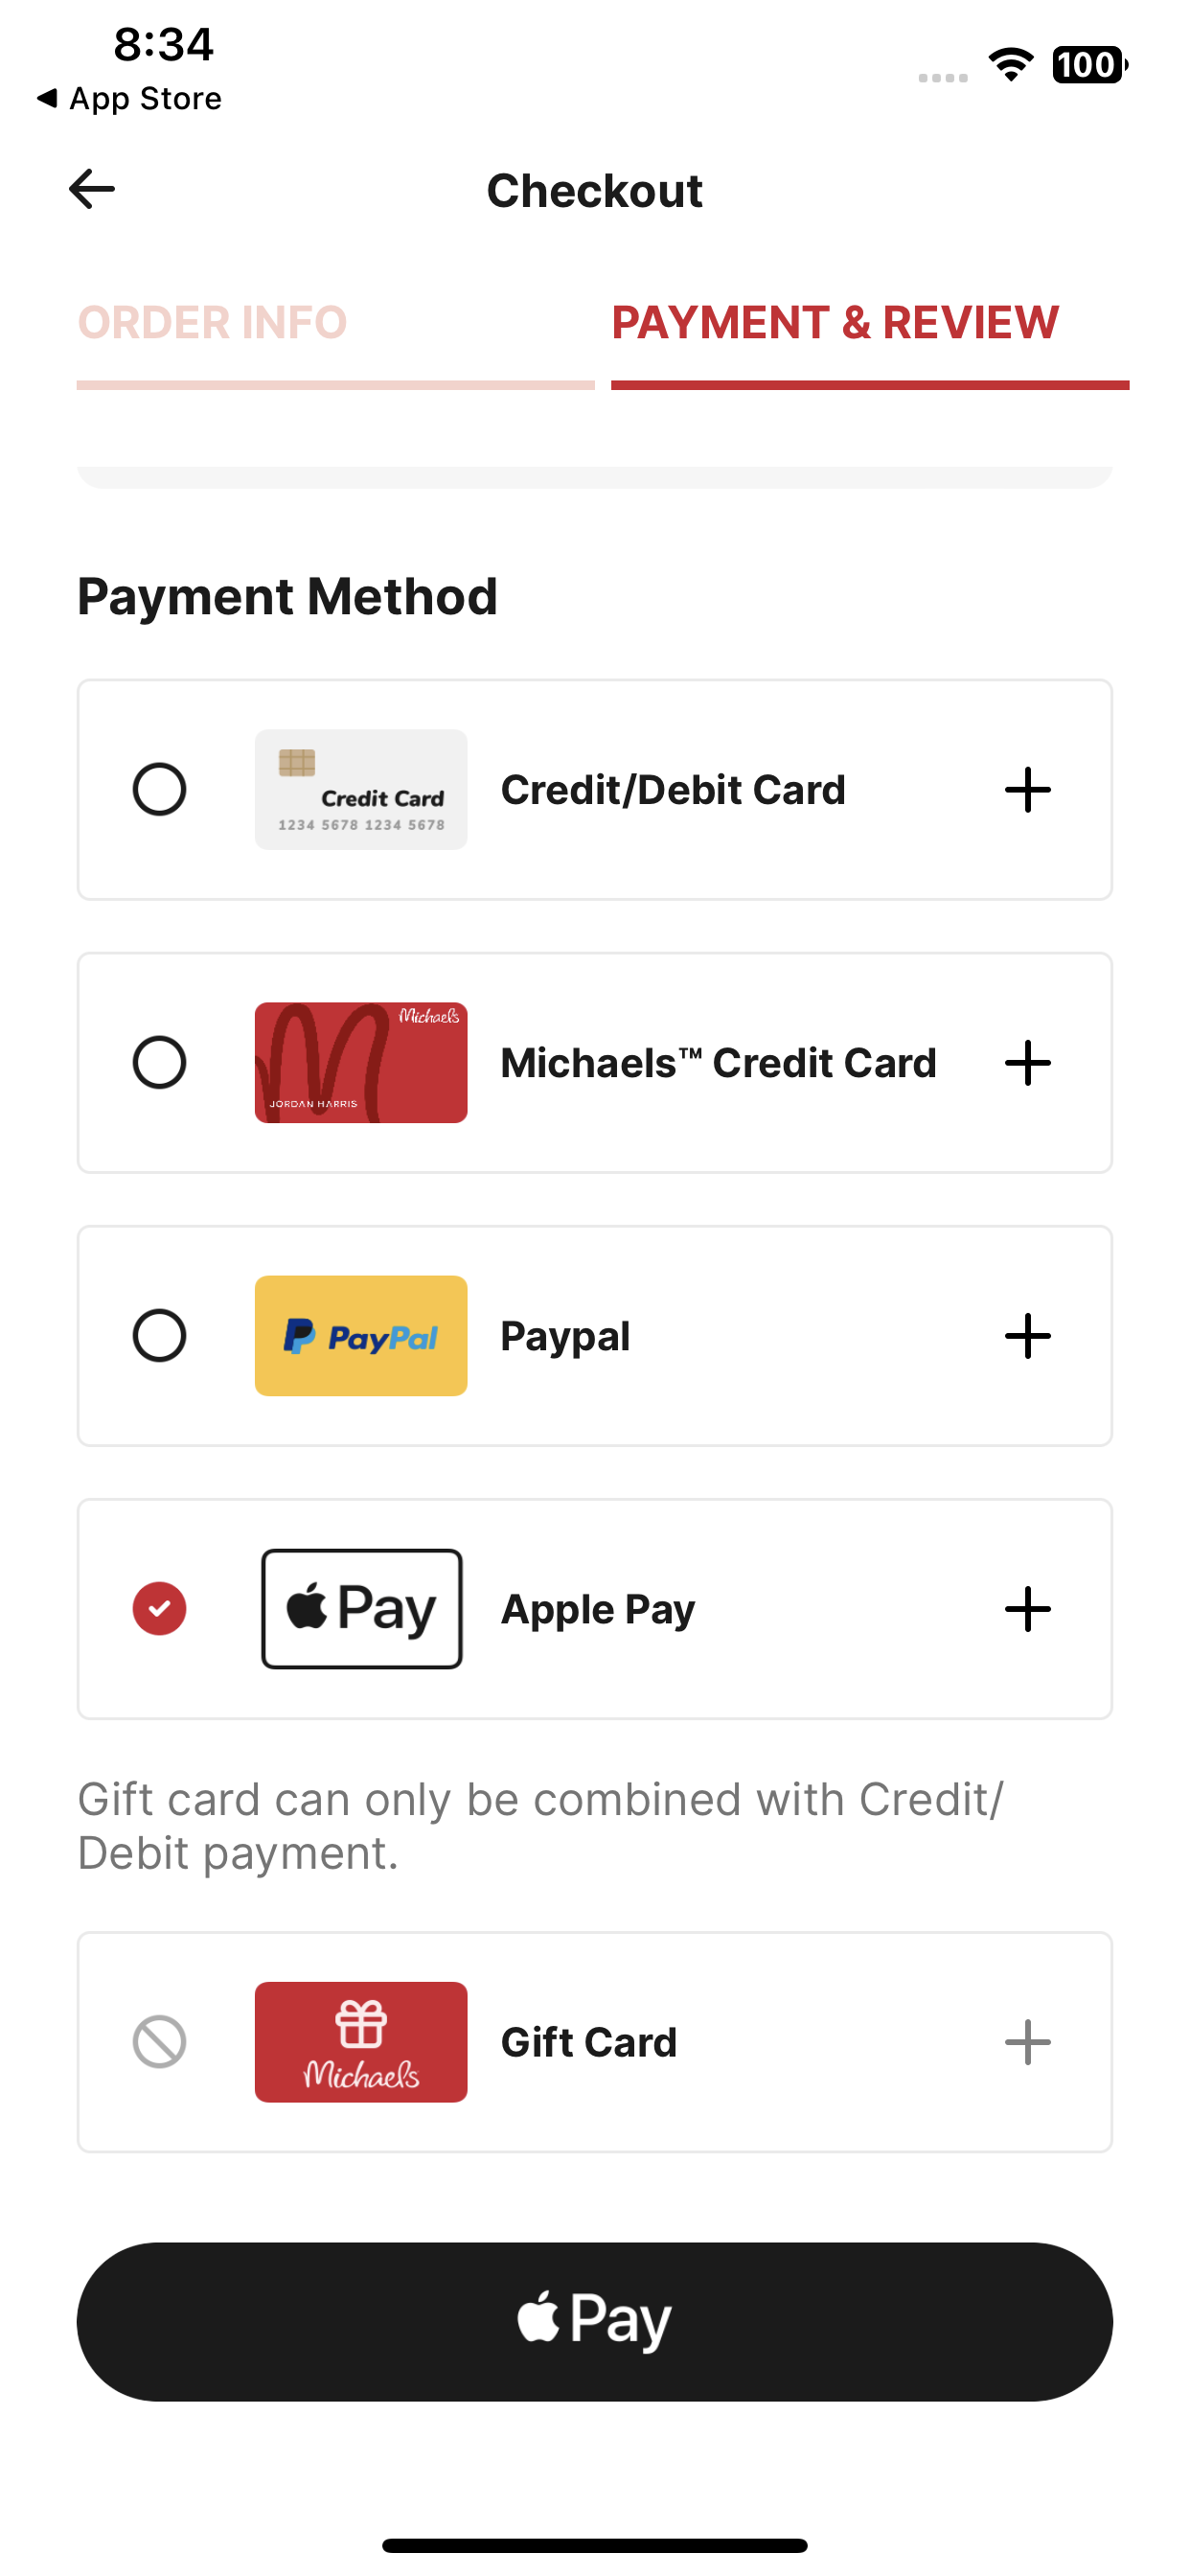 Michaels accepts Apple Pay in its iOS app.